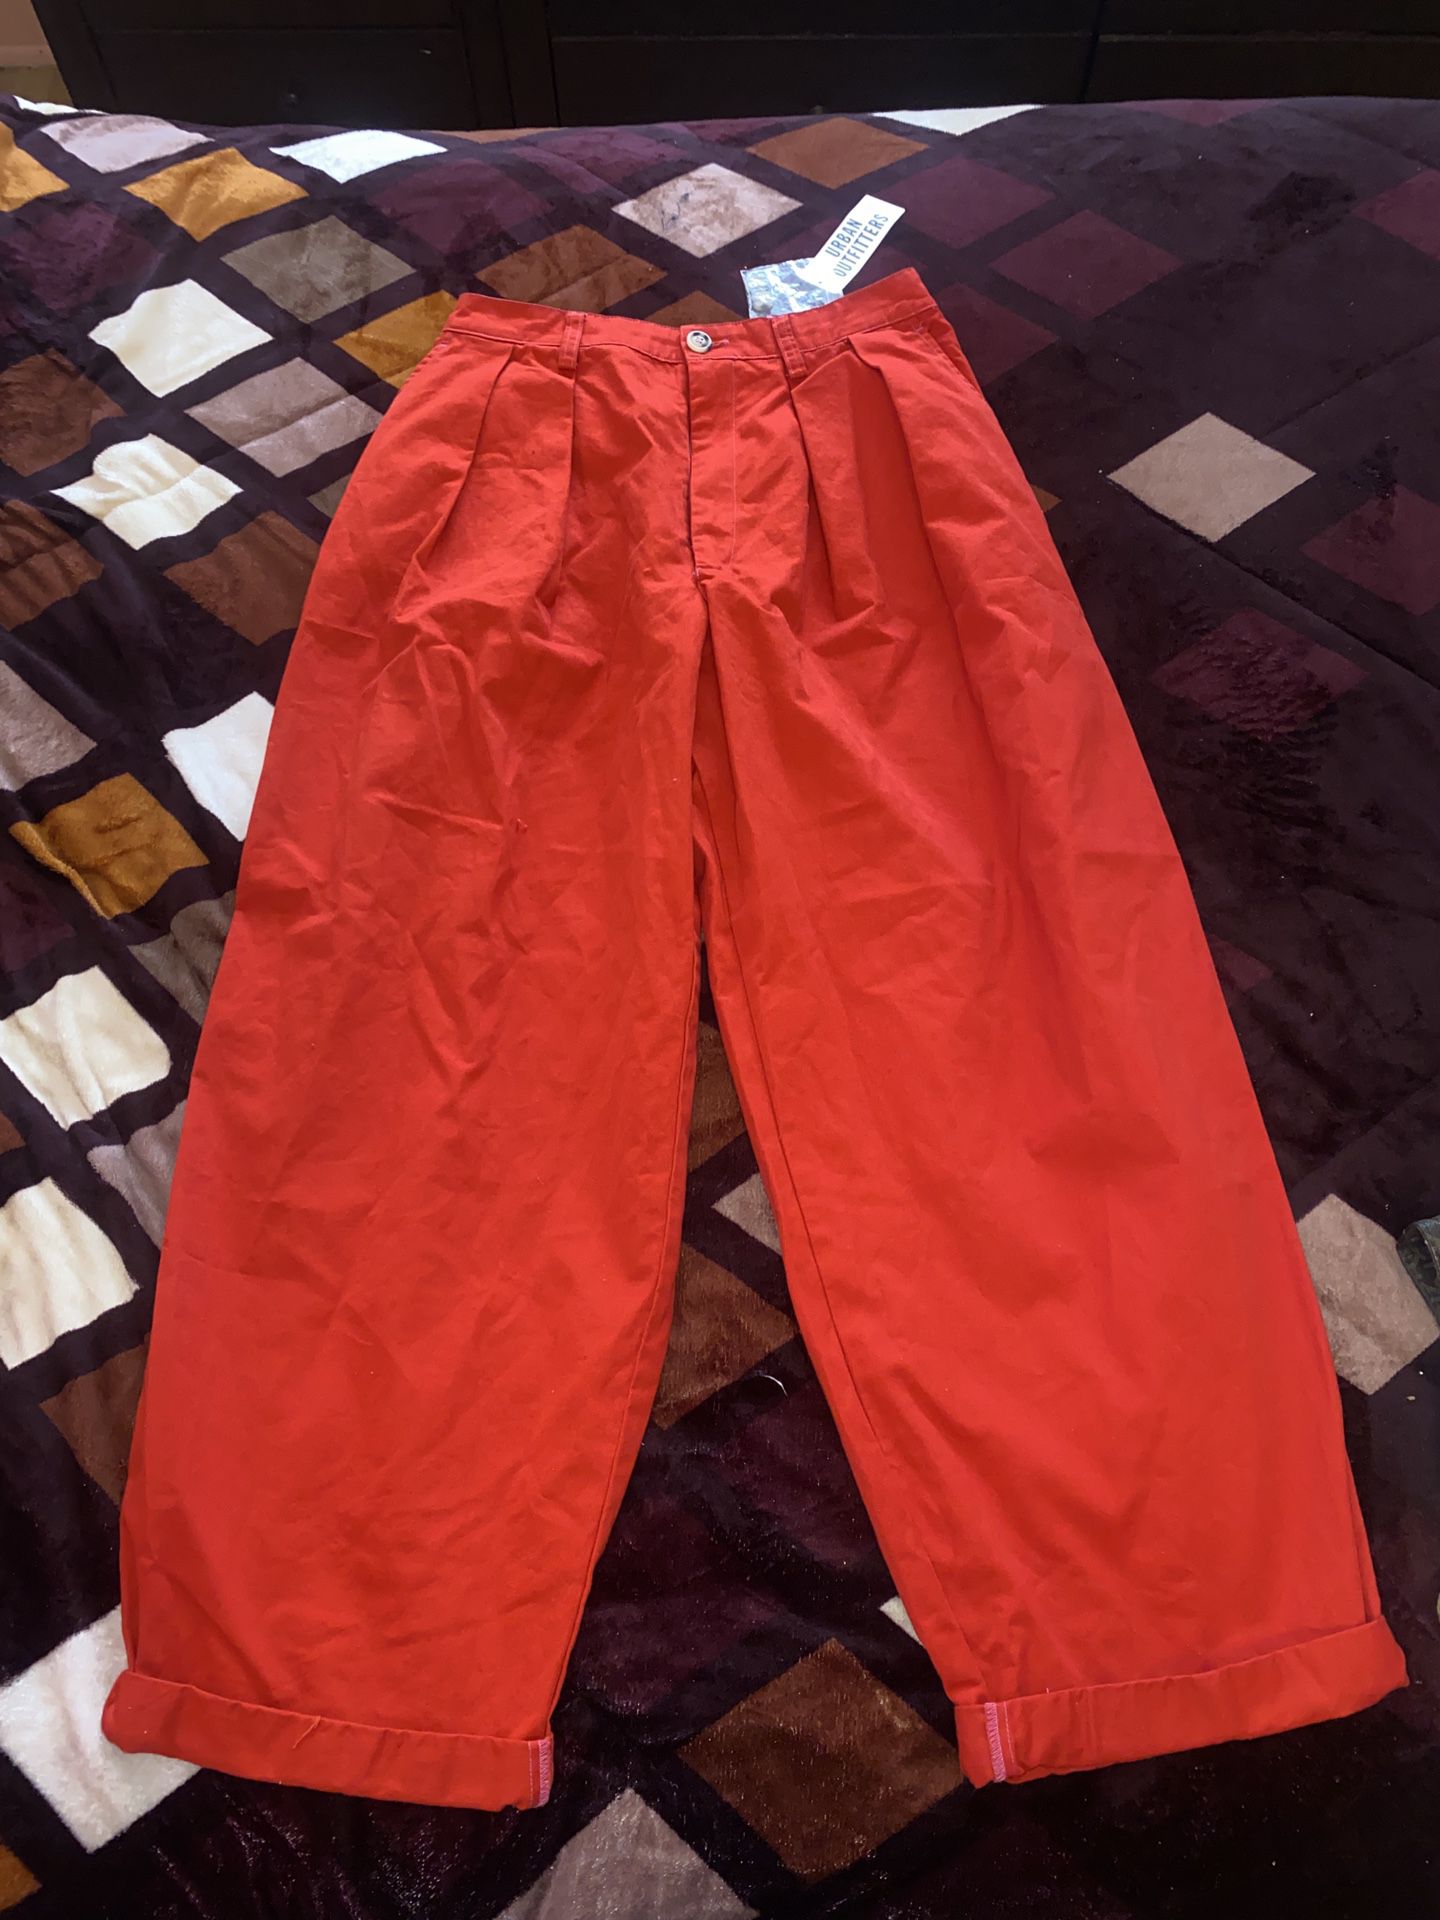 Urban Outfitters Red Pants